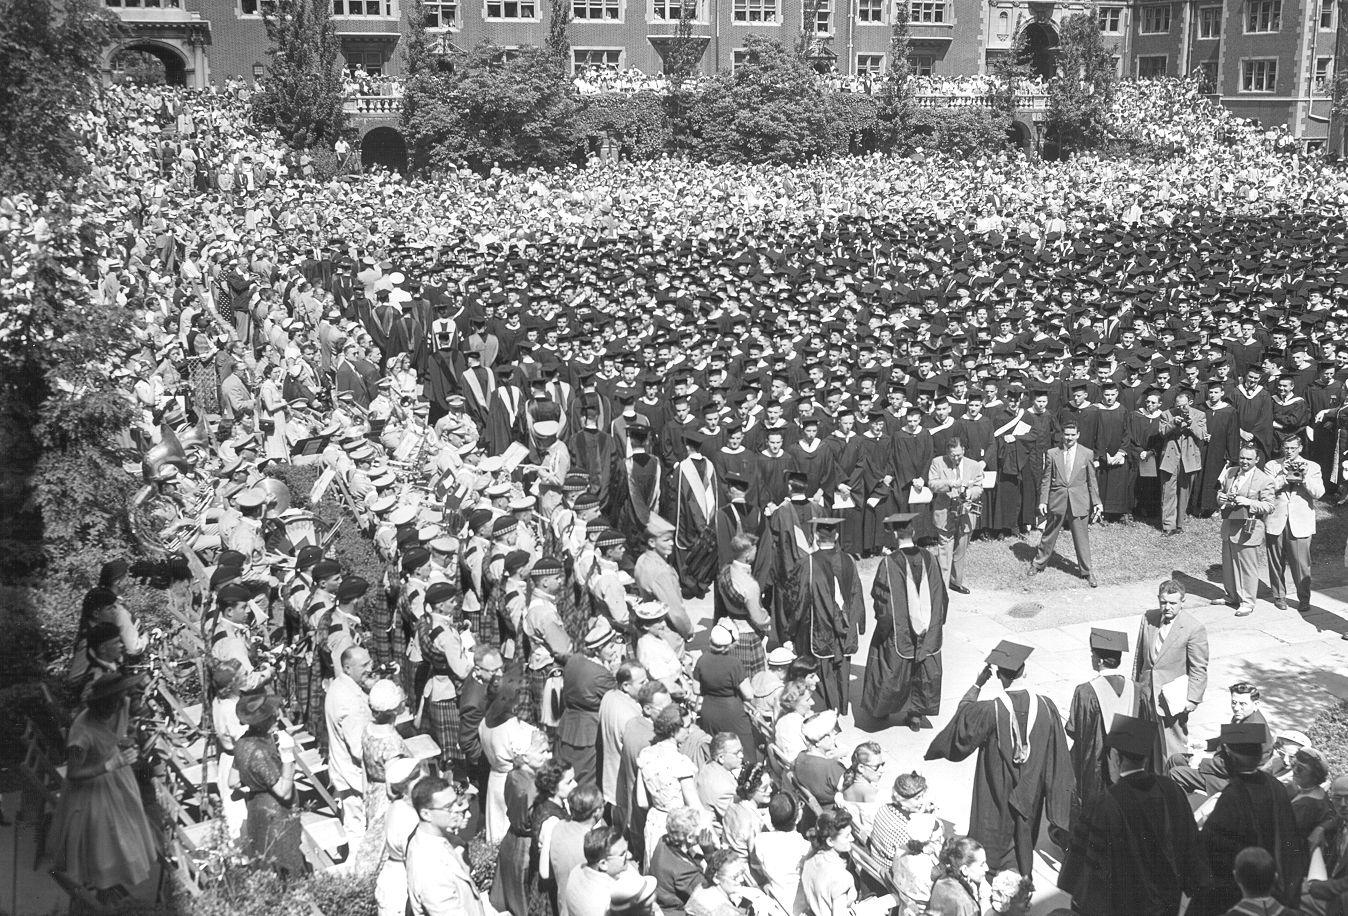 A Penn Commencement in 1953.